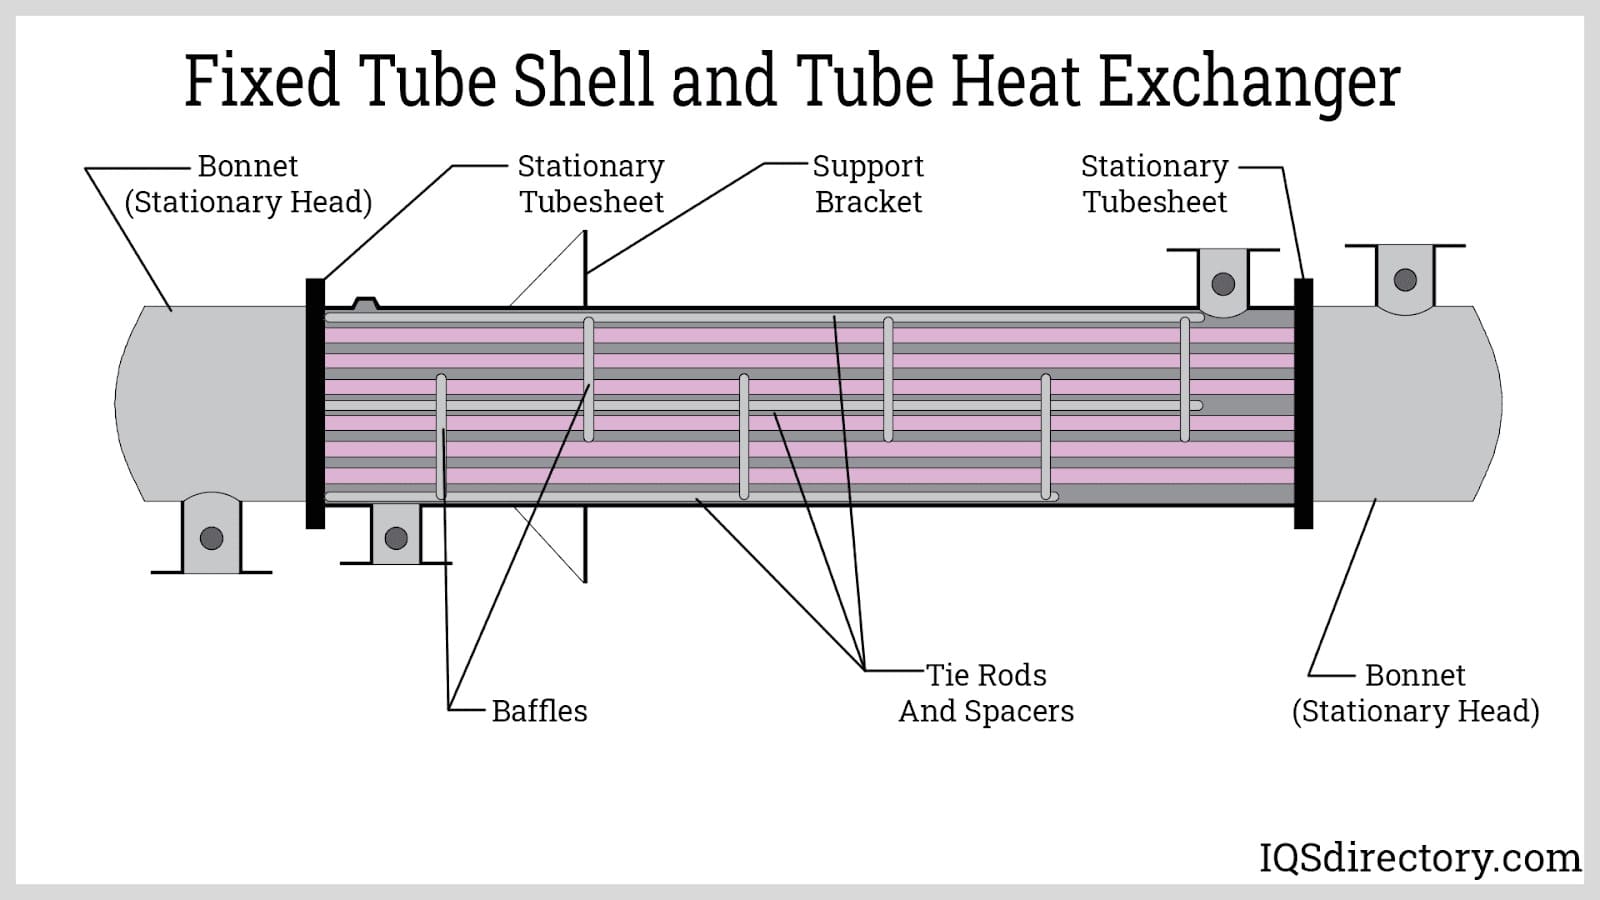 Fixed Tube Shell and Tube Heat Exchanger